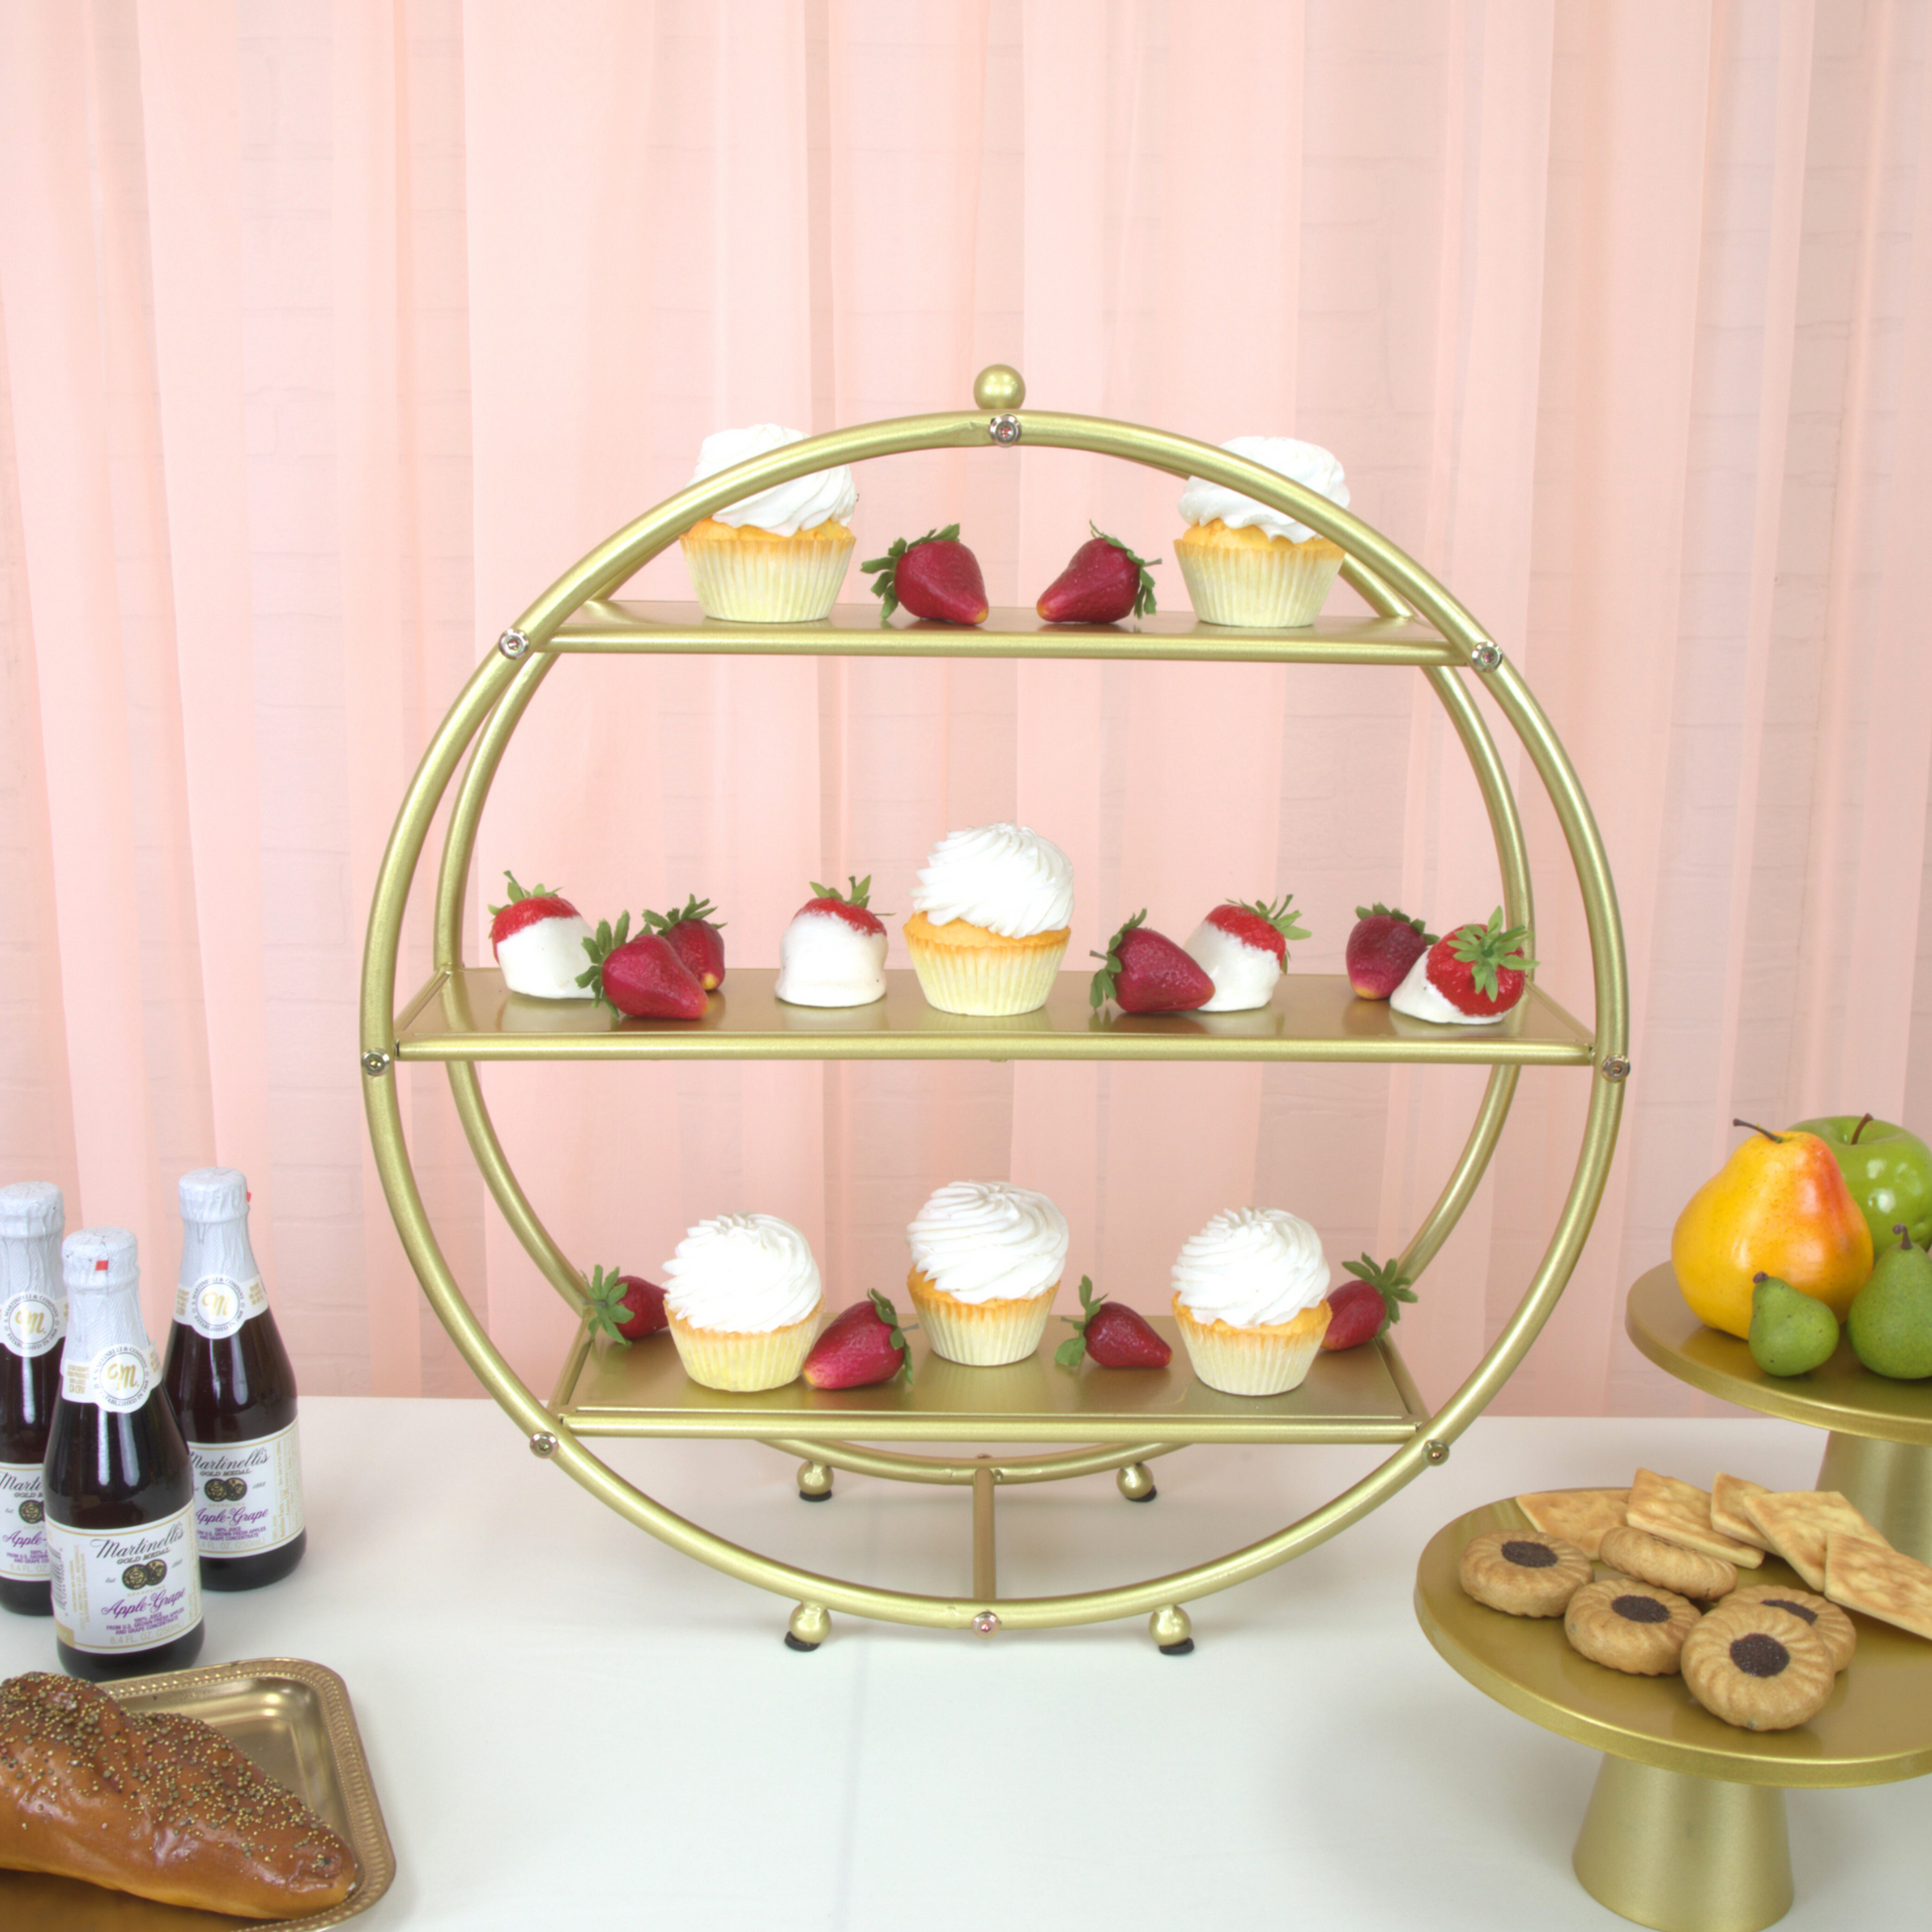 Multi Layer Tier Cake Stand, Cake Tiers Stands Support